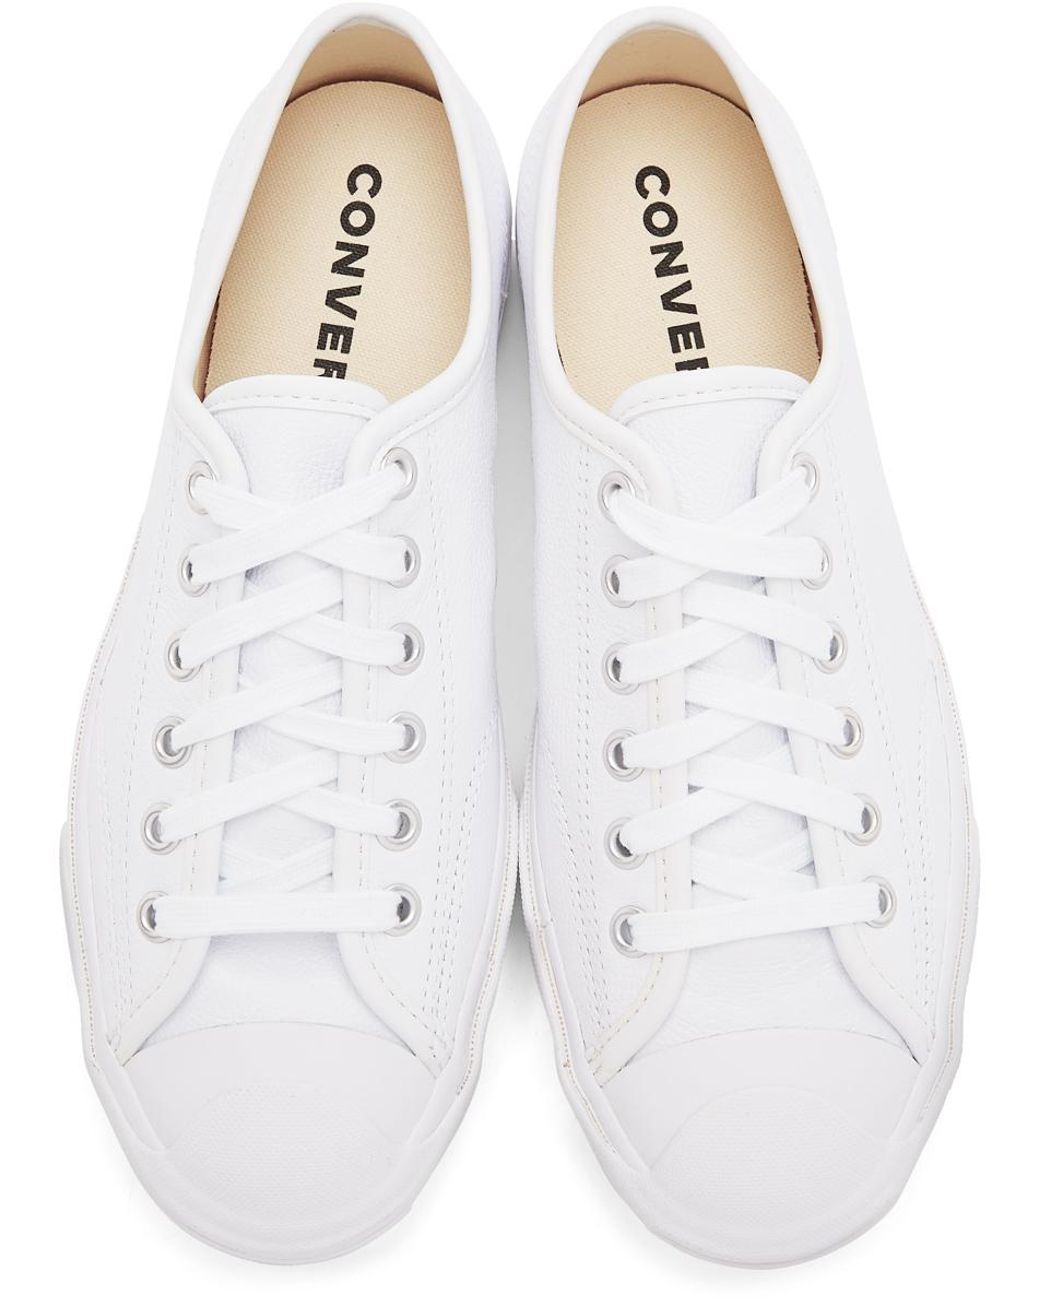 Converse Leather Jack Purcell Sneakers in White/White/White (White) for Men  - Lyst